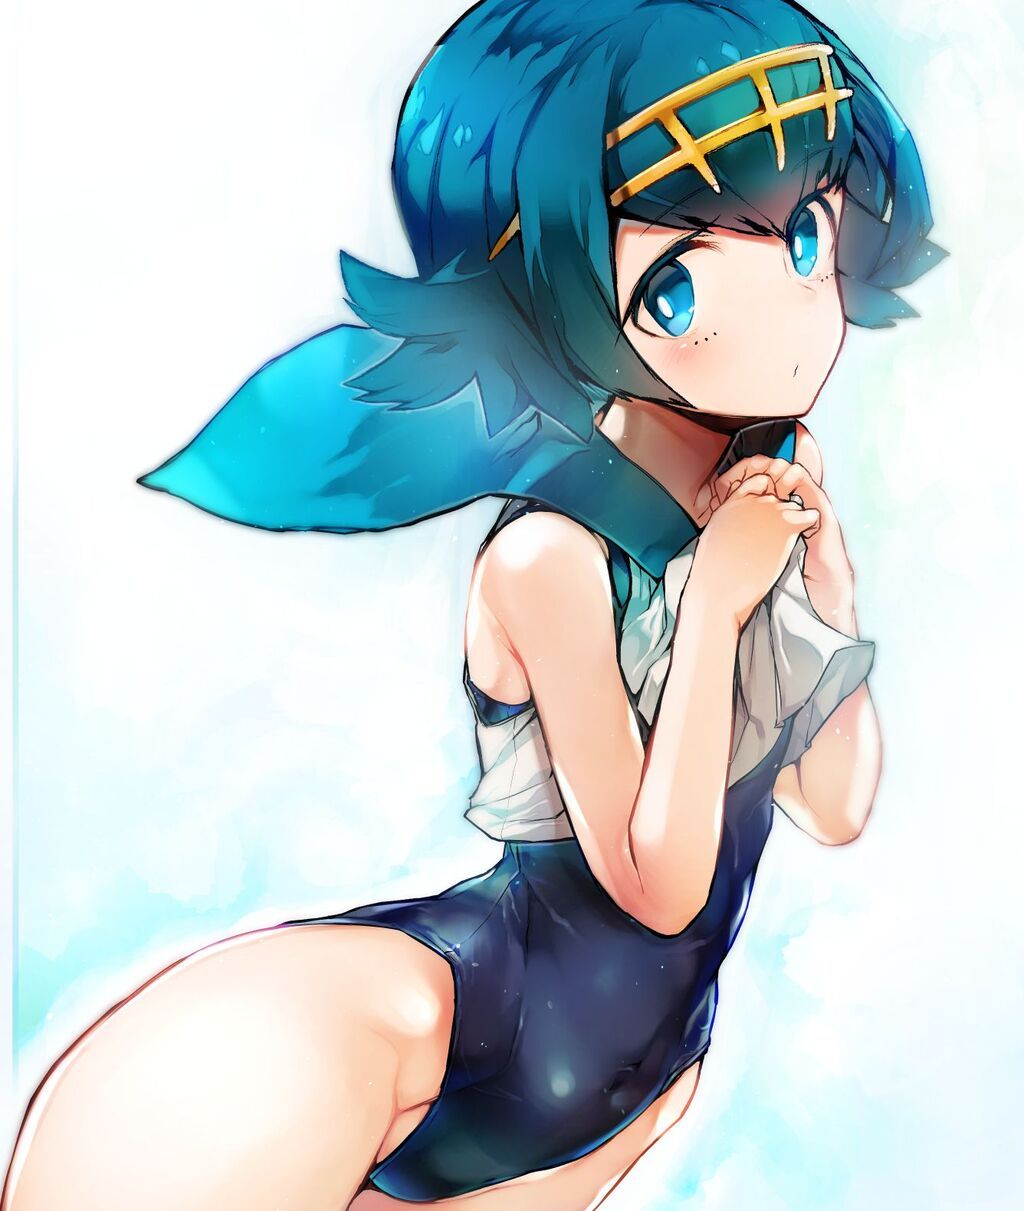 【Sukusui】An image of a suku water girl who looks good on the dazzling sun Part 2 11